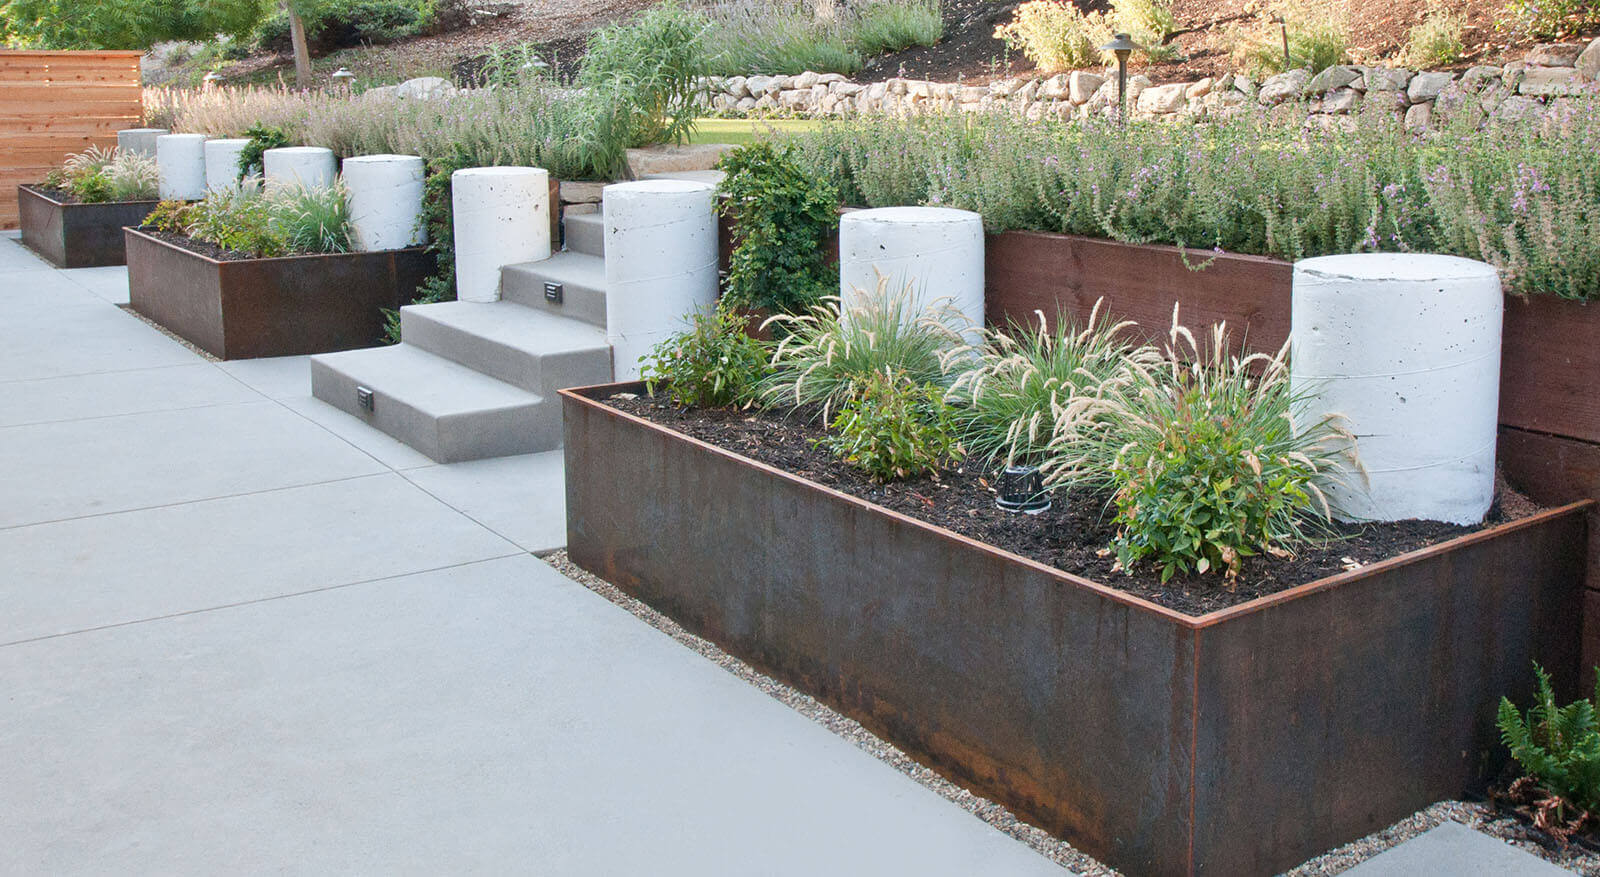 Metal raised beds, with concrete pillars and stairs, leading to elevated lawn and flower beds, with sloped back yard above